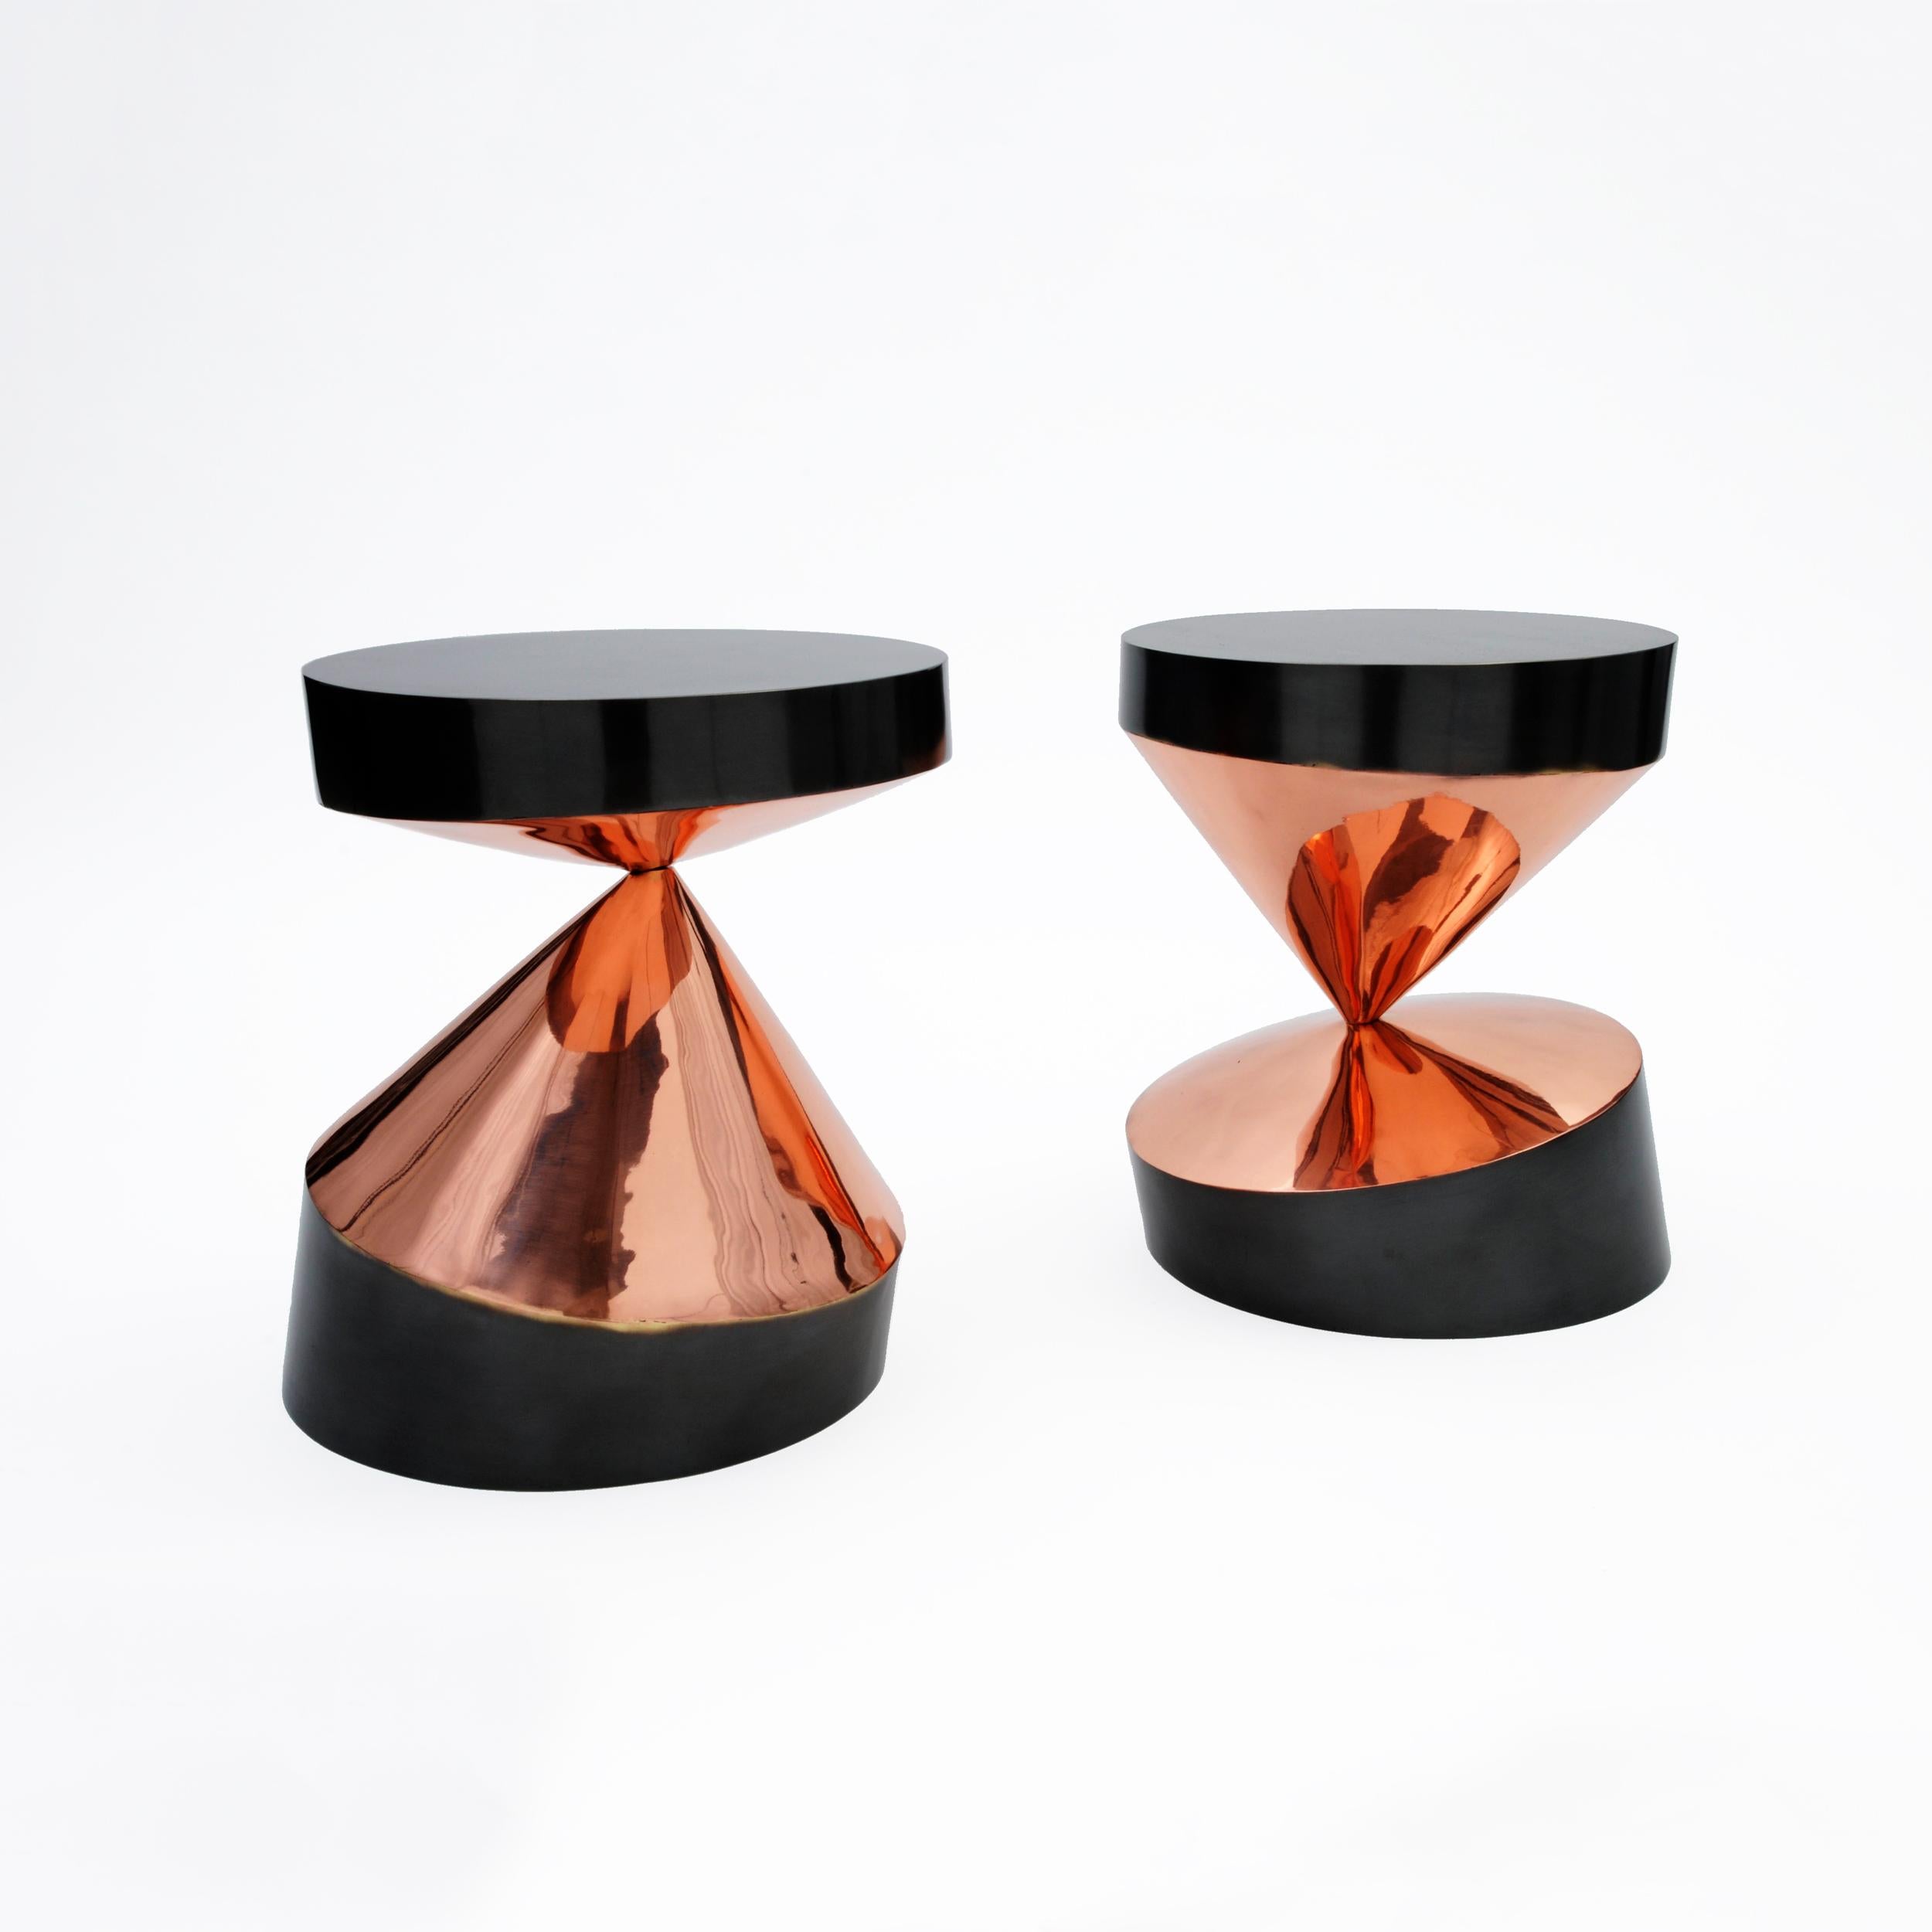 Whirling Twins - Bronze

'Whirling Twins' are a pair of small sculptural tables where two cones balancing on their tips maintain a perfectly horizontal plane in burnished brass.
The red cones in polished copper reflect flames of warm and vibrant